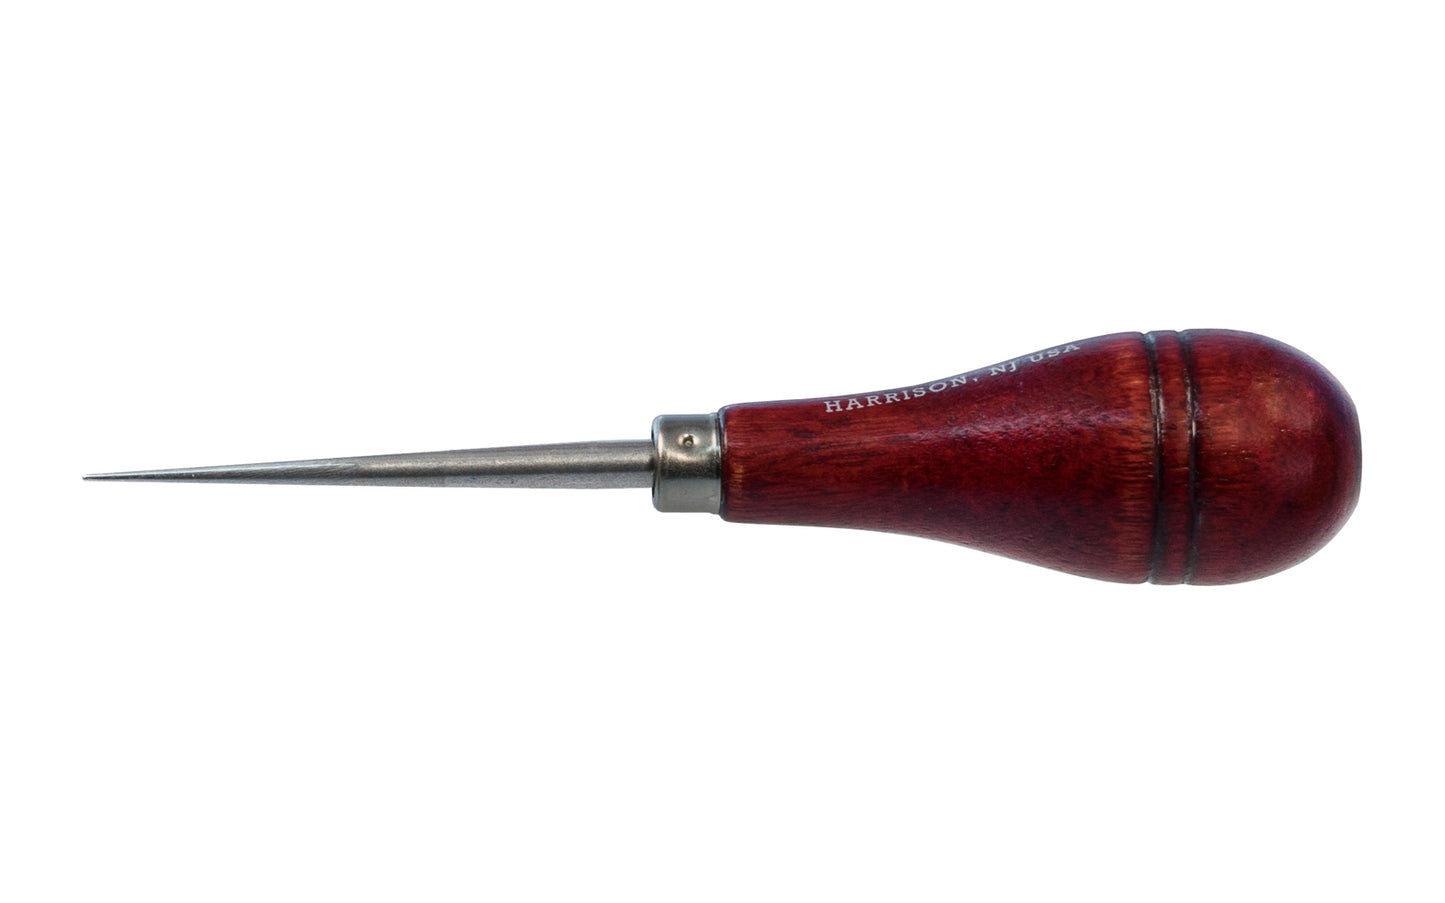 CS Osborne Fid ~ No. 477 - Blunt awl for stretching & enlarging holes in leather for easy lacing. Also used for stippling, tightening or loosening knots - Hardwood wooden handle